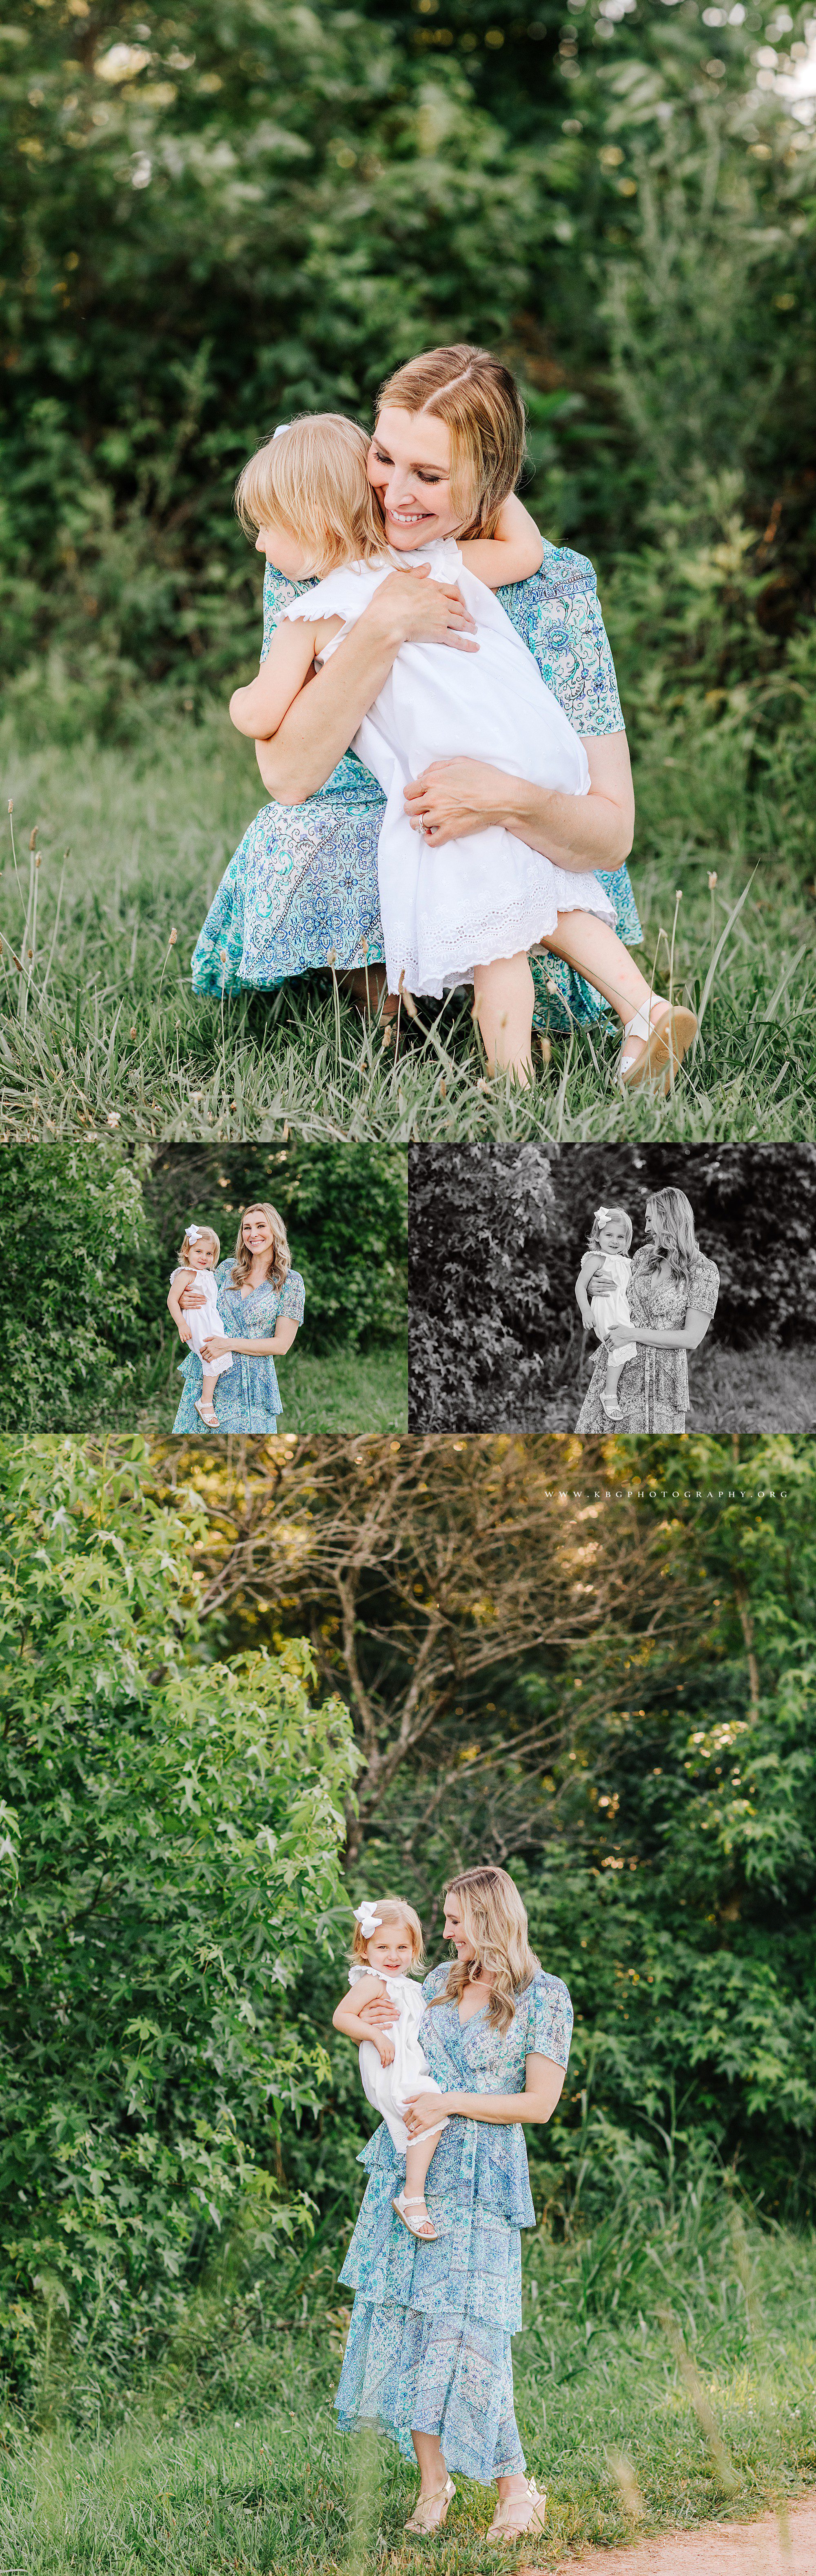 mom holding daughter in field - marietta family photography